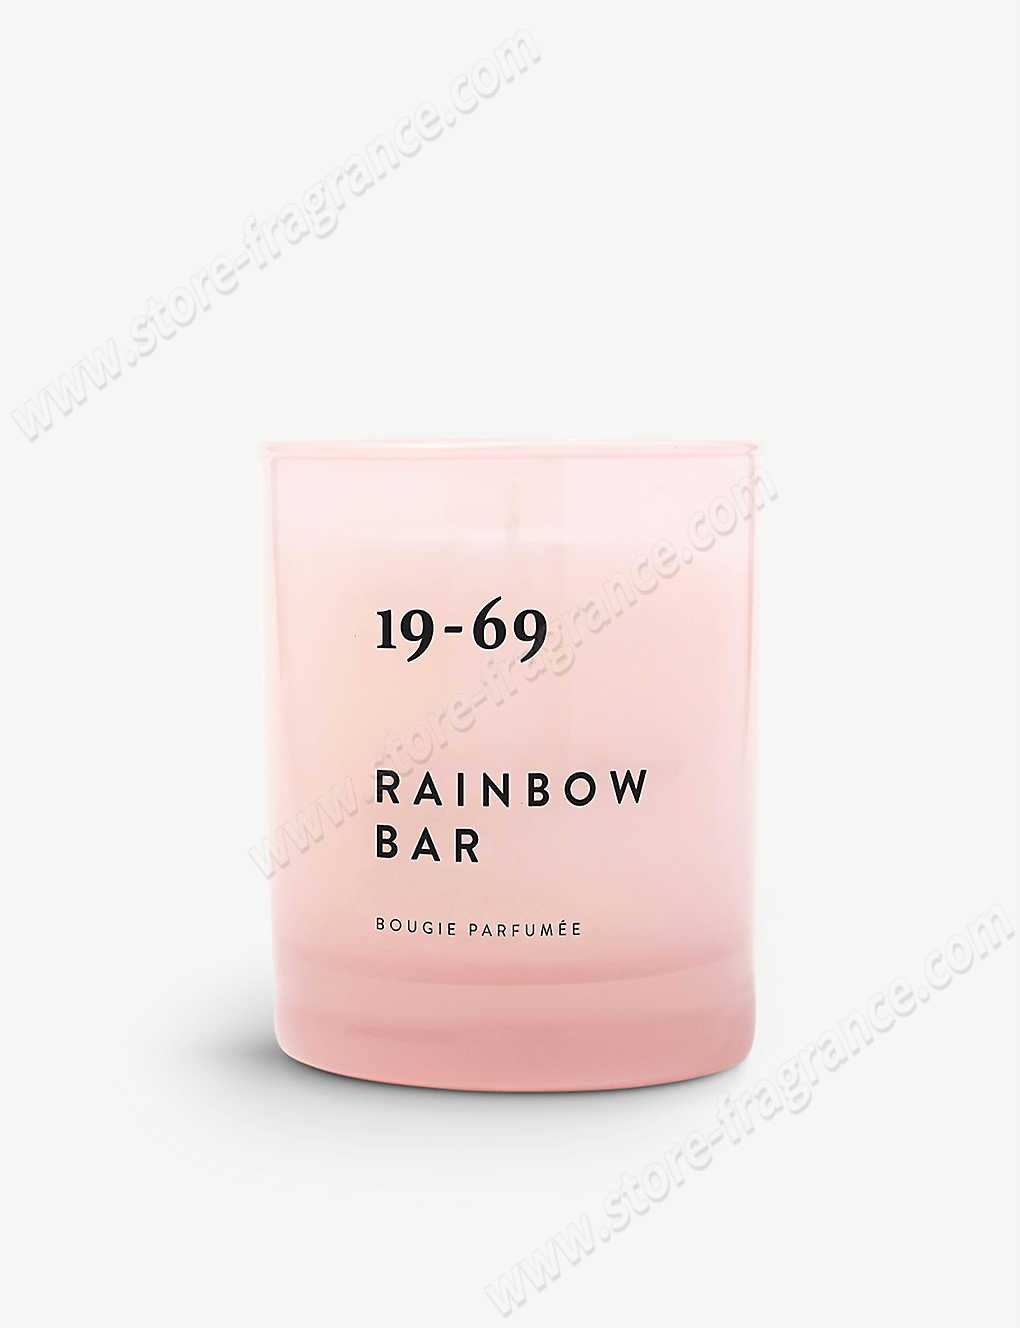 19-69/Rainbow Bar vegetable-wax candle 200ml ✿ Discount Store - -0